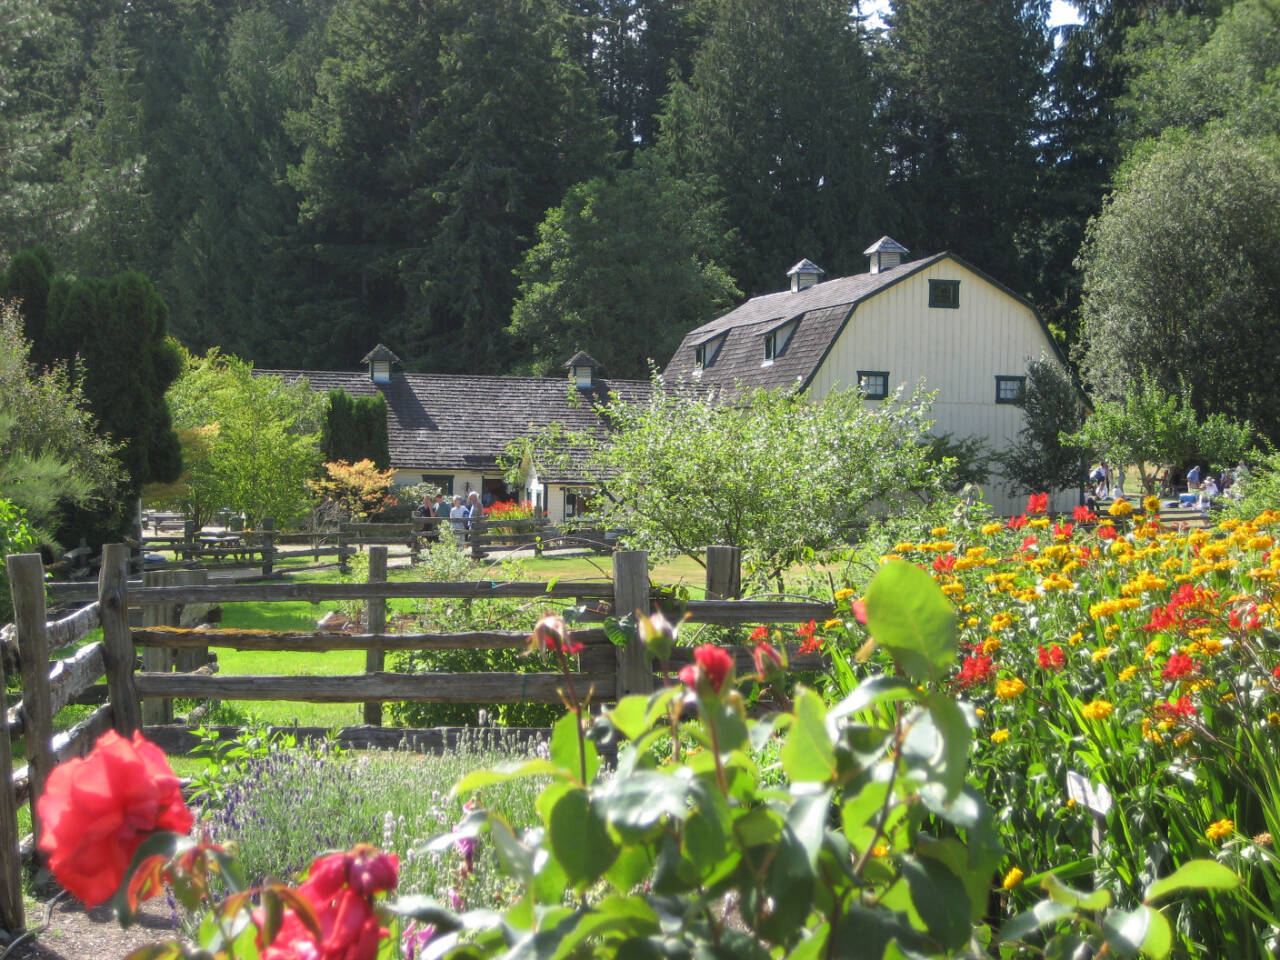 Photo courtesy of Concerts in the Barn
Enjoy chamber music and a picnic while enjoying the picaresque venue at this Quilcene farm at the Concerts at the Barn, held this year June 15-Aug. 4.